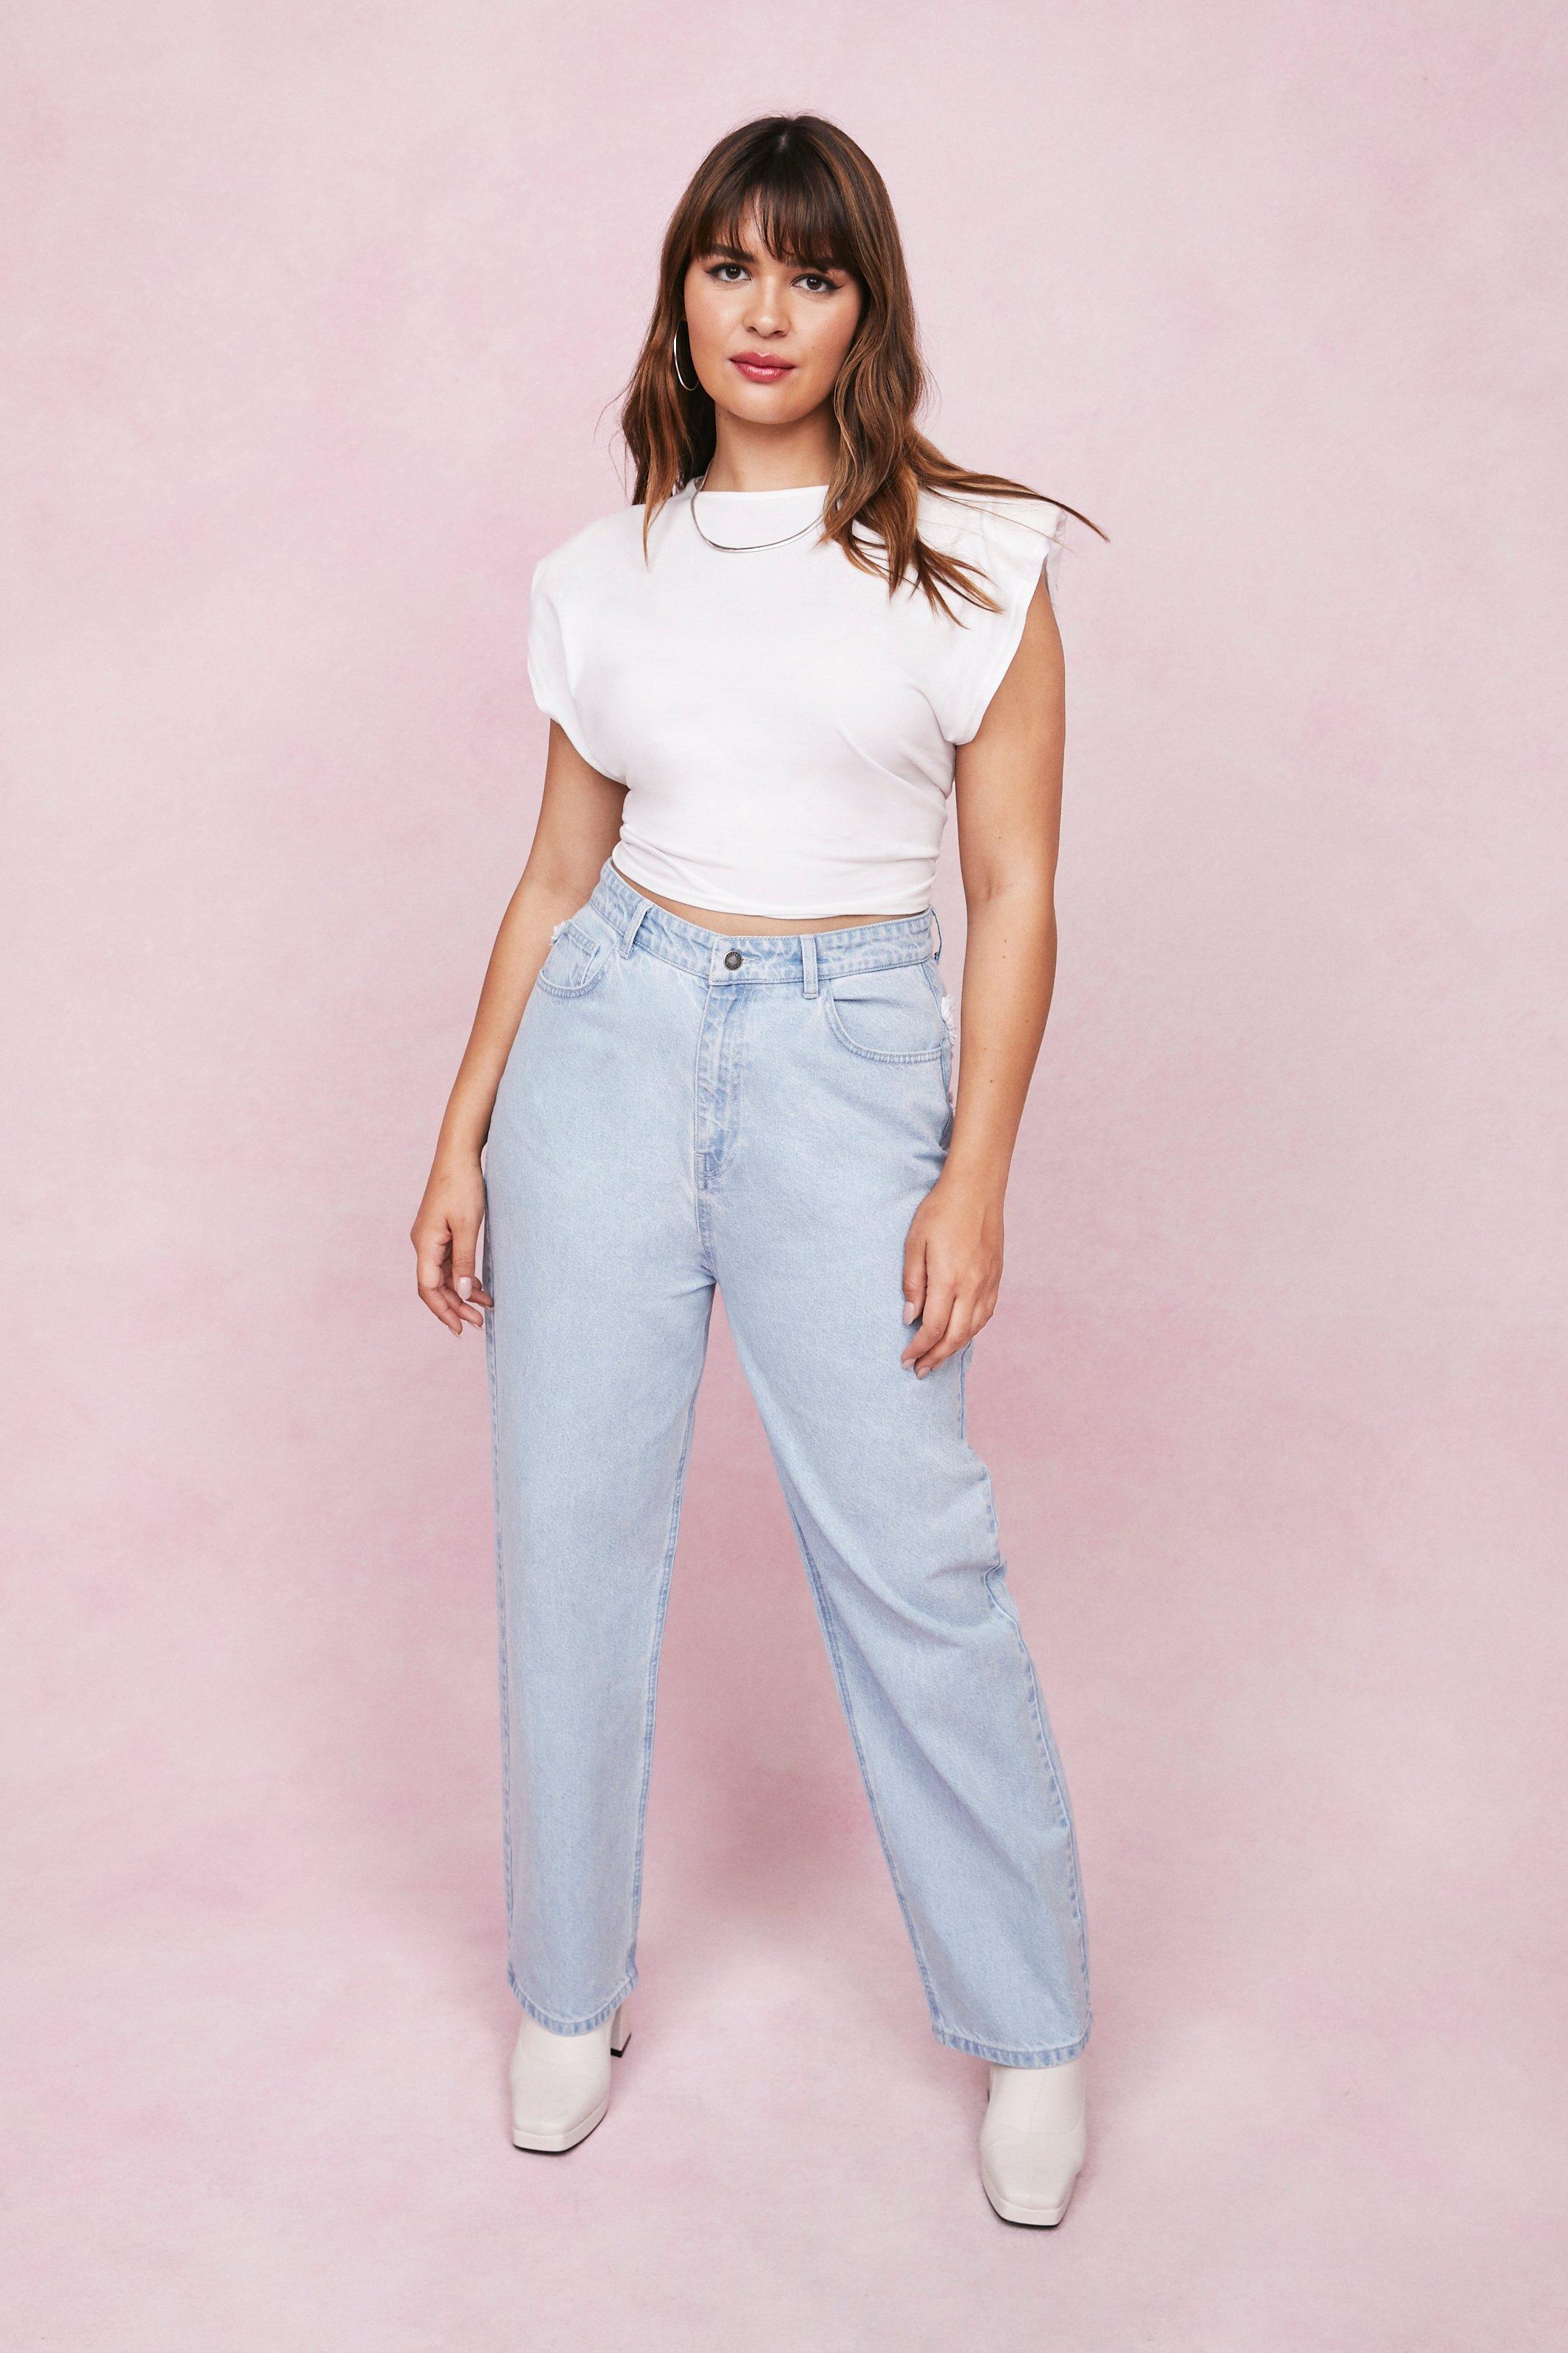 Plus Size Star Design High Waisted Jeans